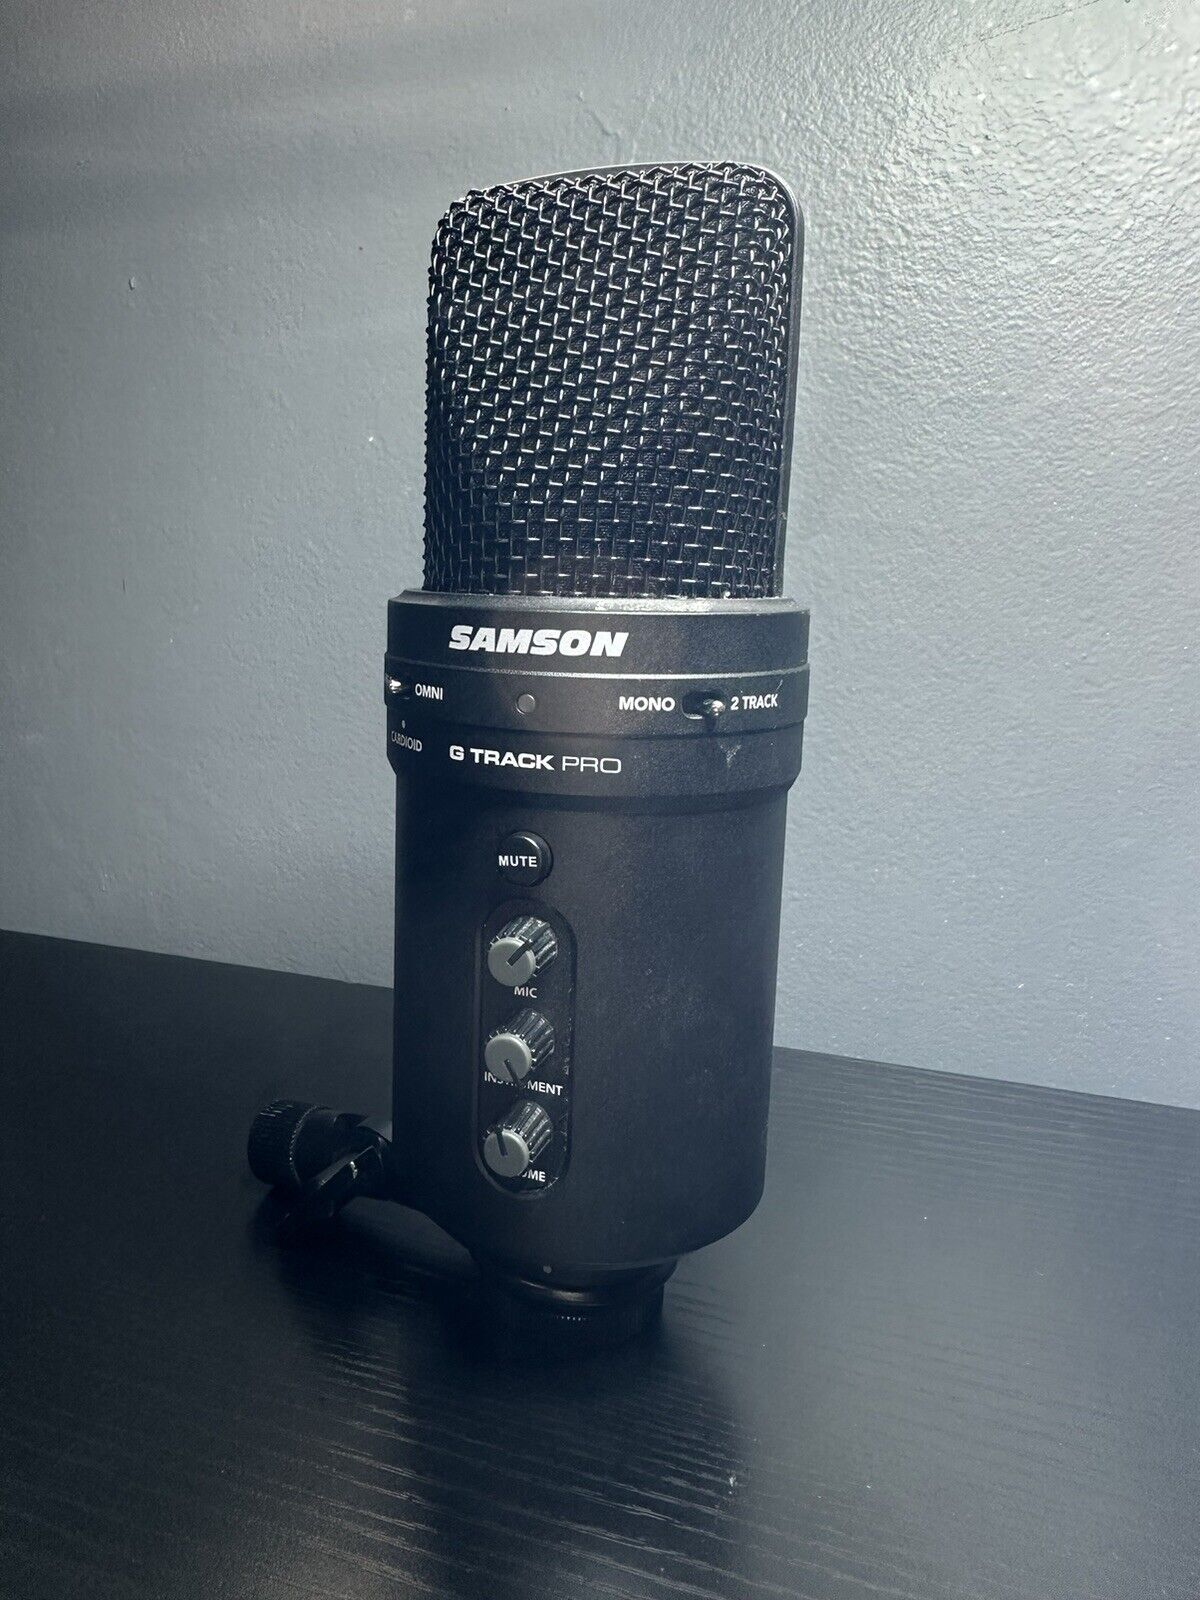 Samson G-Track Pro USB Microphone - Black, NO STAND OR CABLE